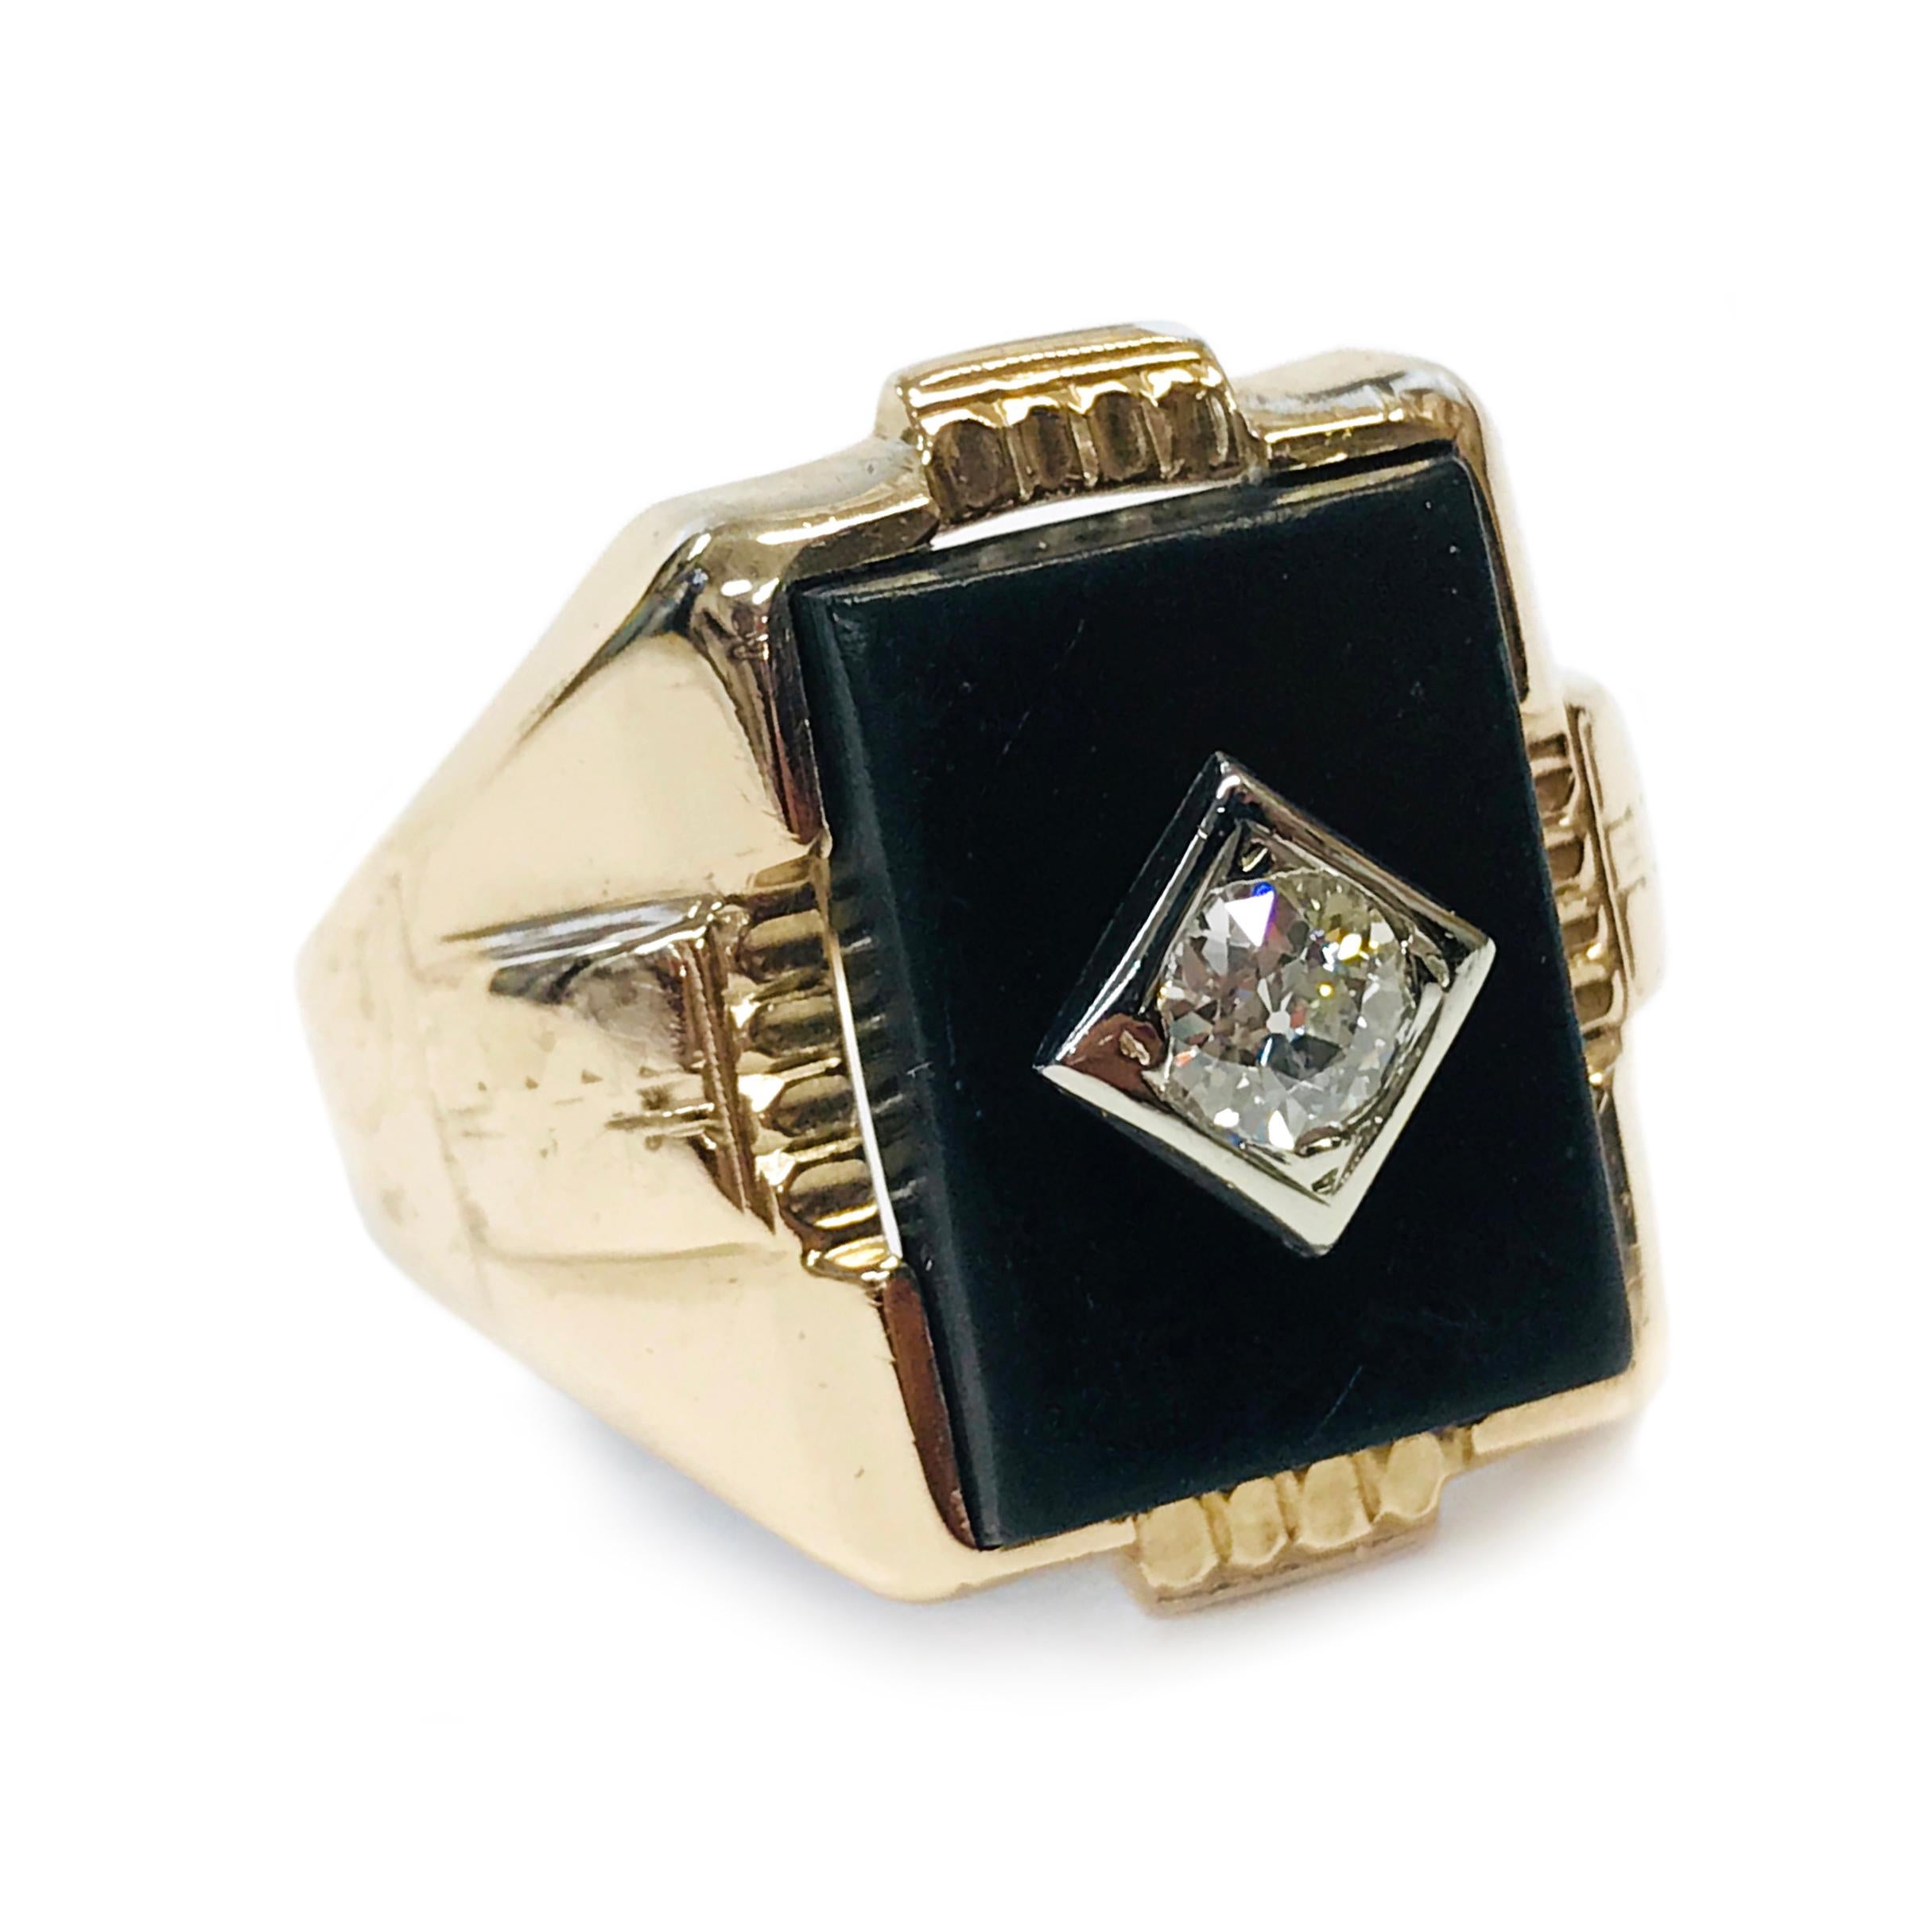 10 Karat Art Deco Diamond Onyx Ring. The band has Art Deco designs and all four sides and the band tapers. At the center of the ring is a 15.75mm x 11.8mm Onyx with a white gold square and a bezel-set round Euro-cut diamond. The 4.5mm diamond is VS2